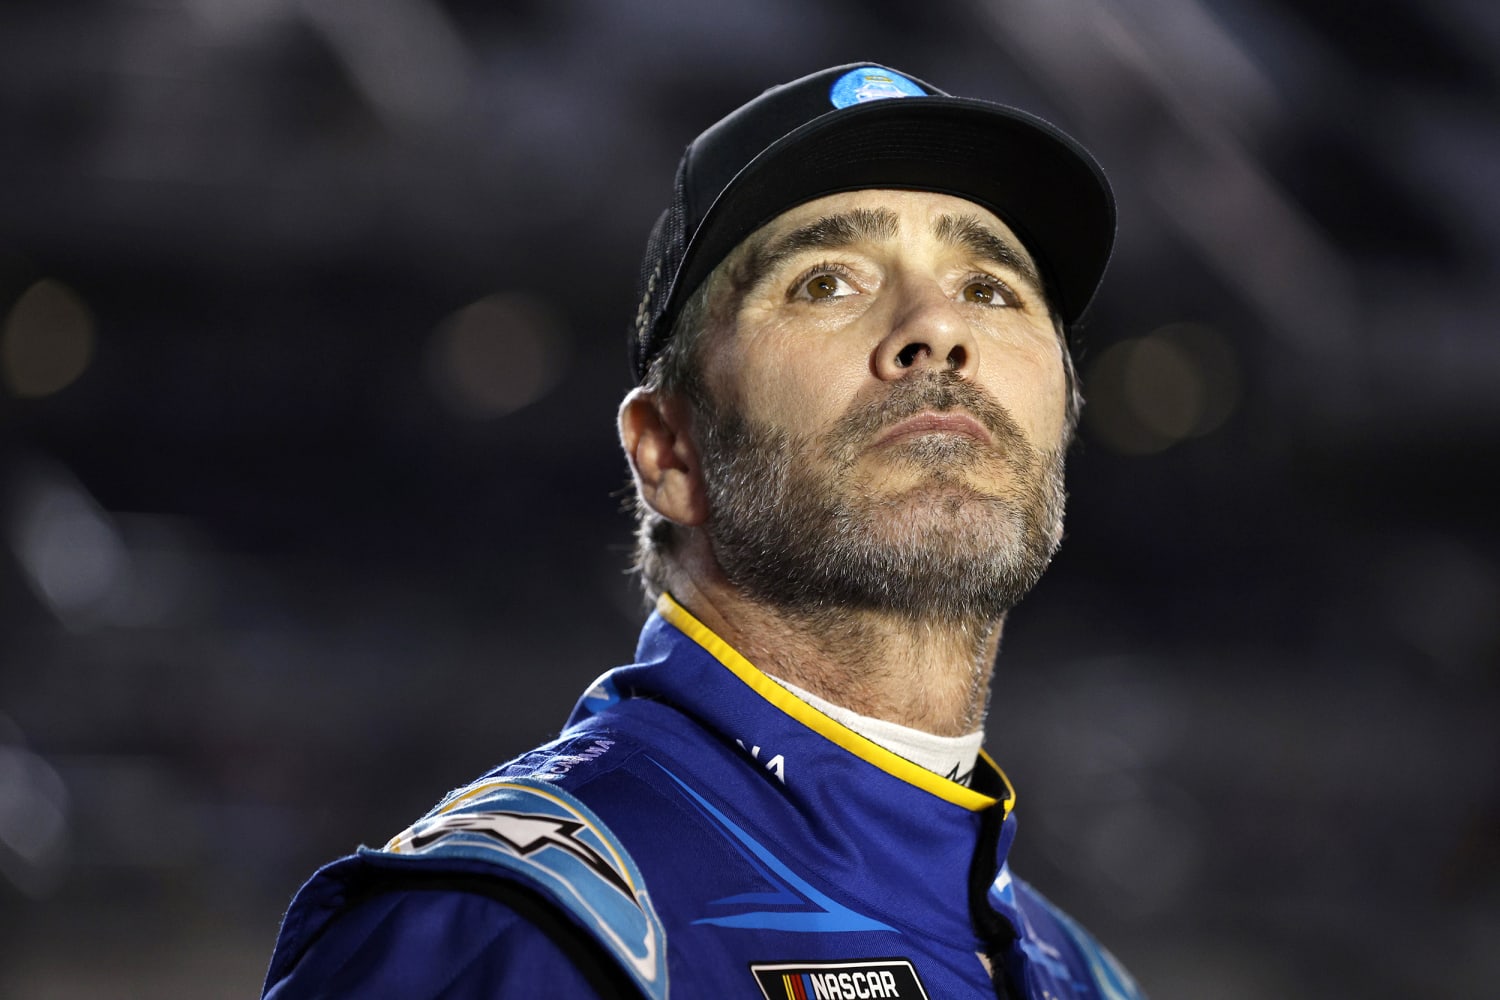 NASCAR driver Jimmie Johnson’s in-laws and their grandson are dead in an apparent murder-suicide